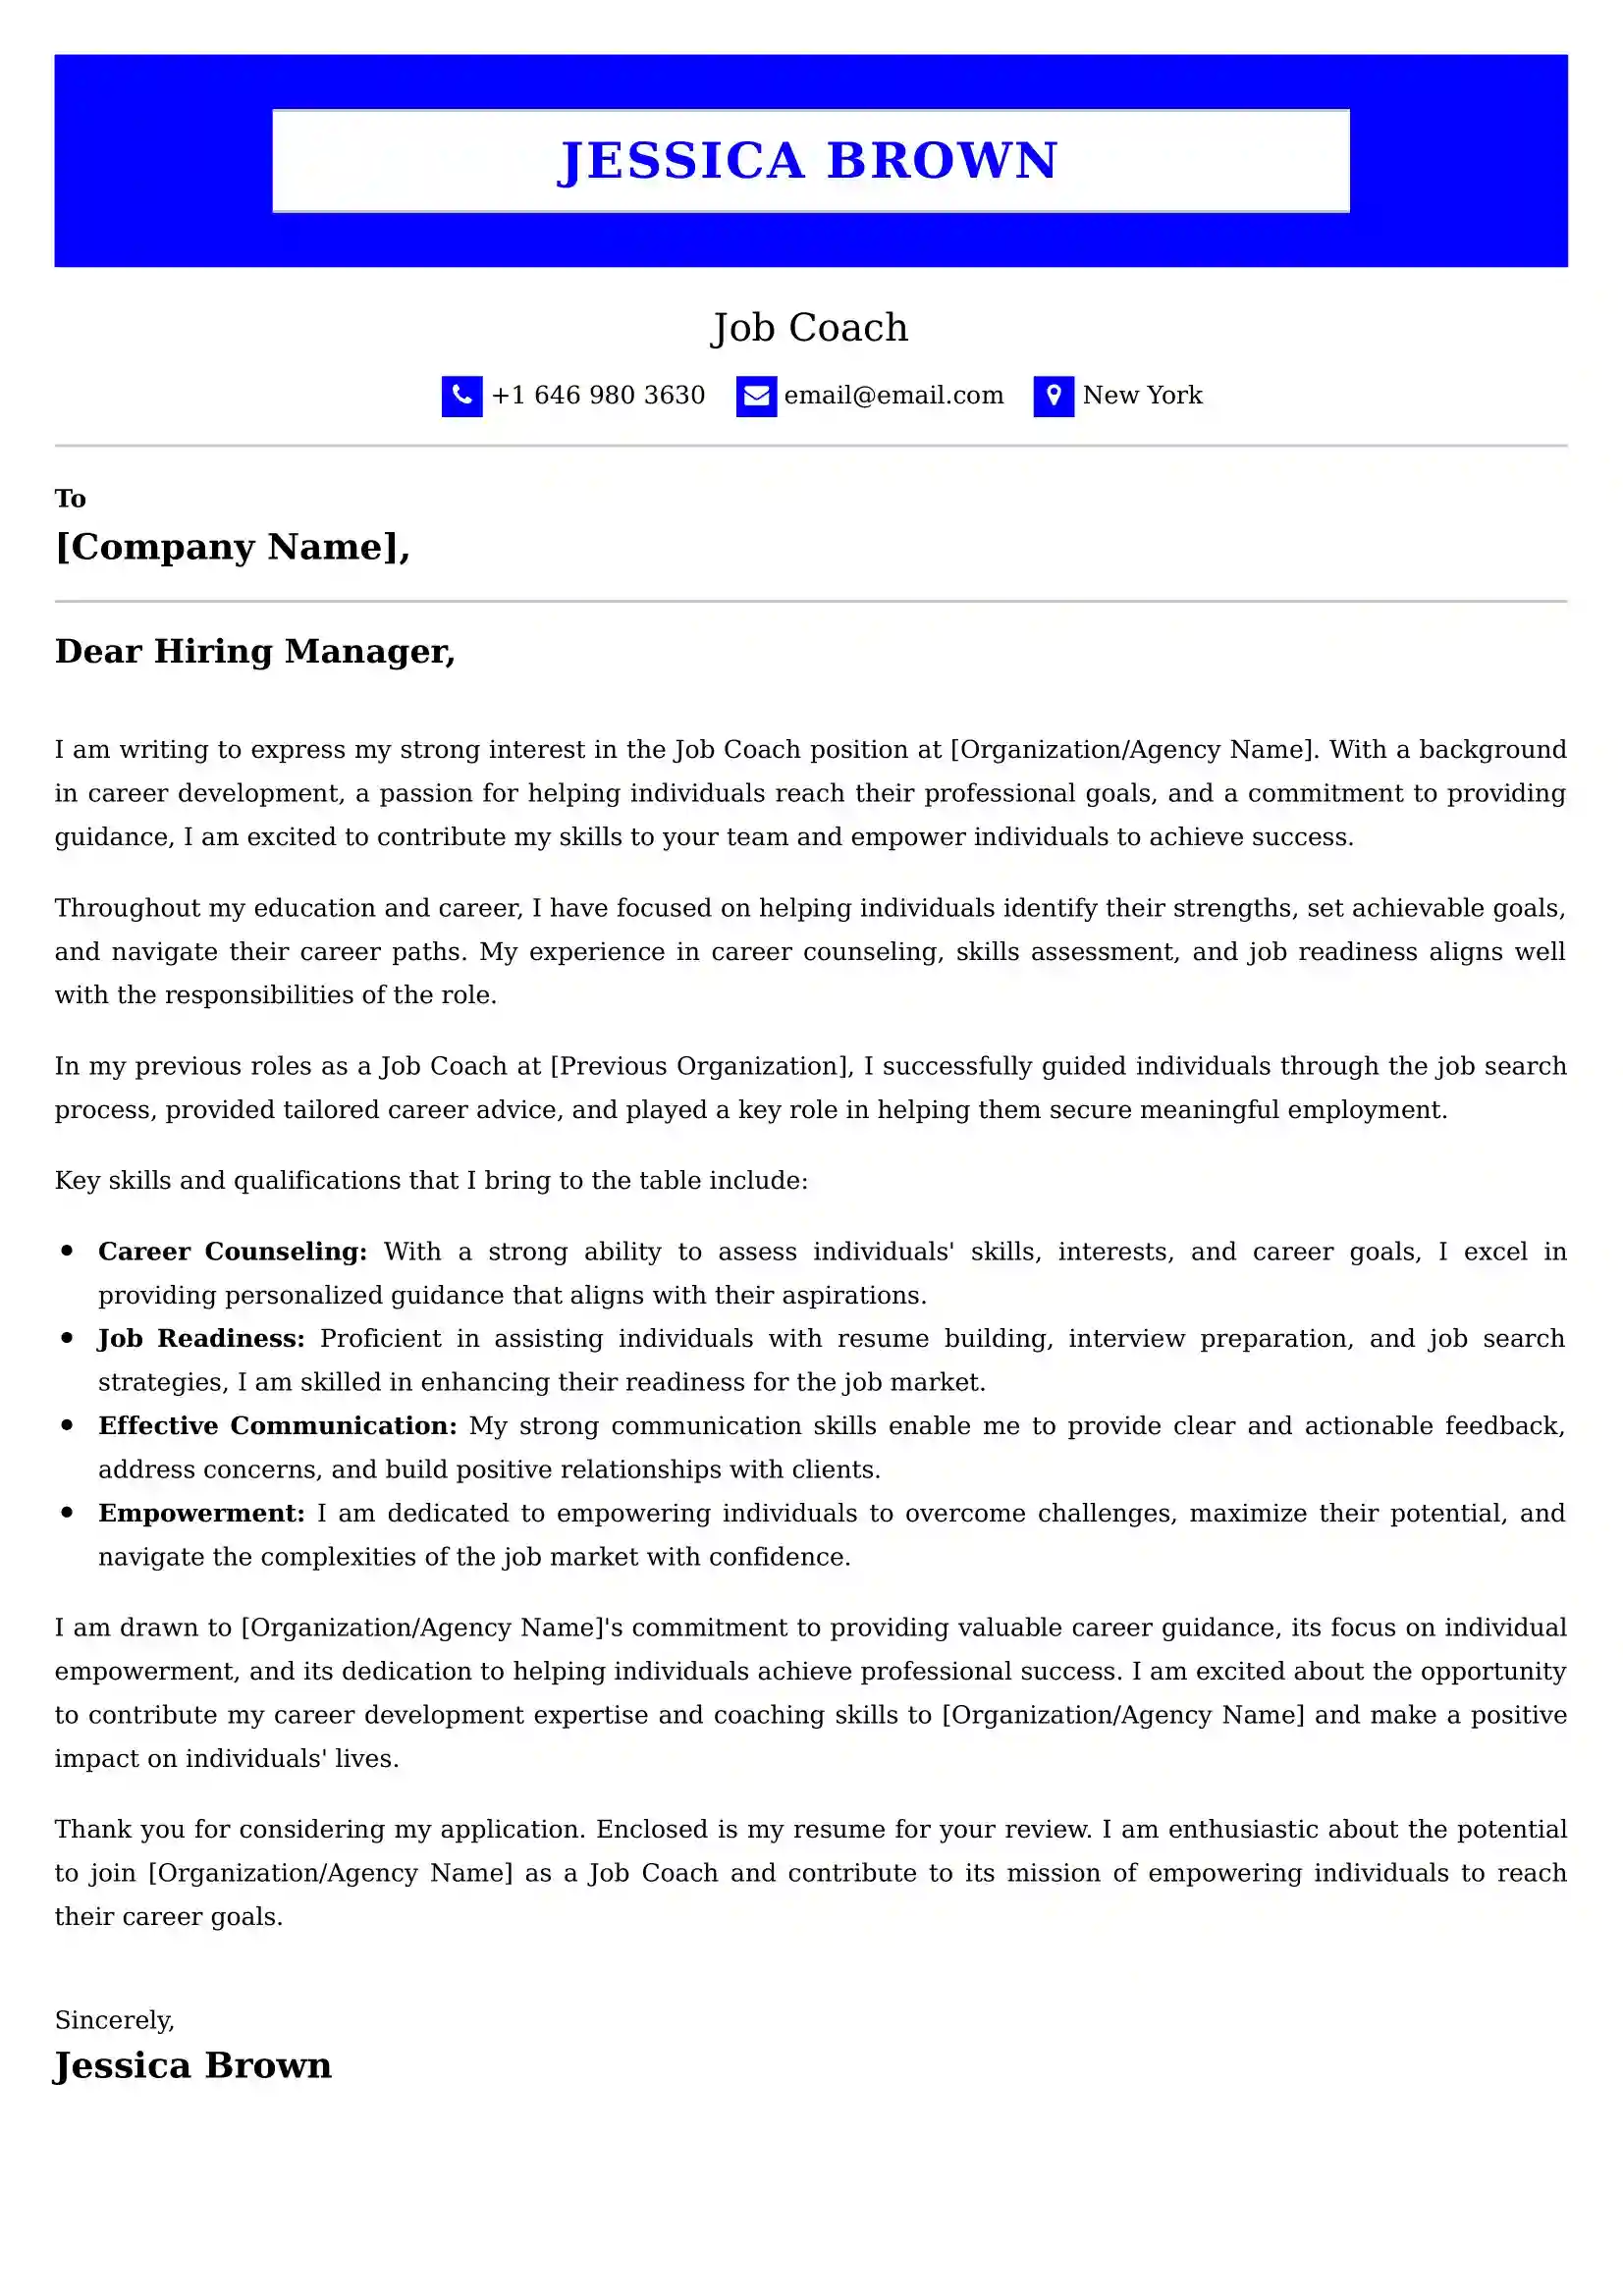 Job Coach Cover Letter Examples -Latest Brazilian Templates